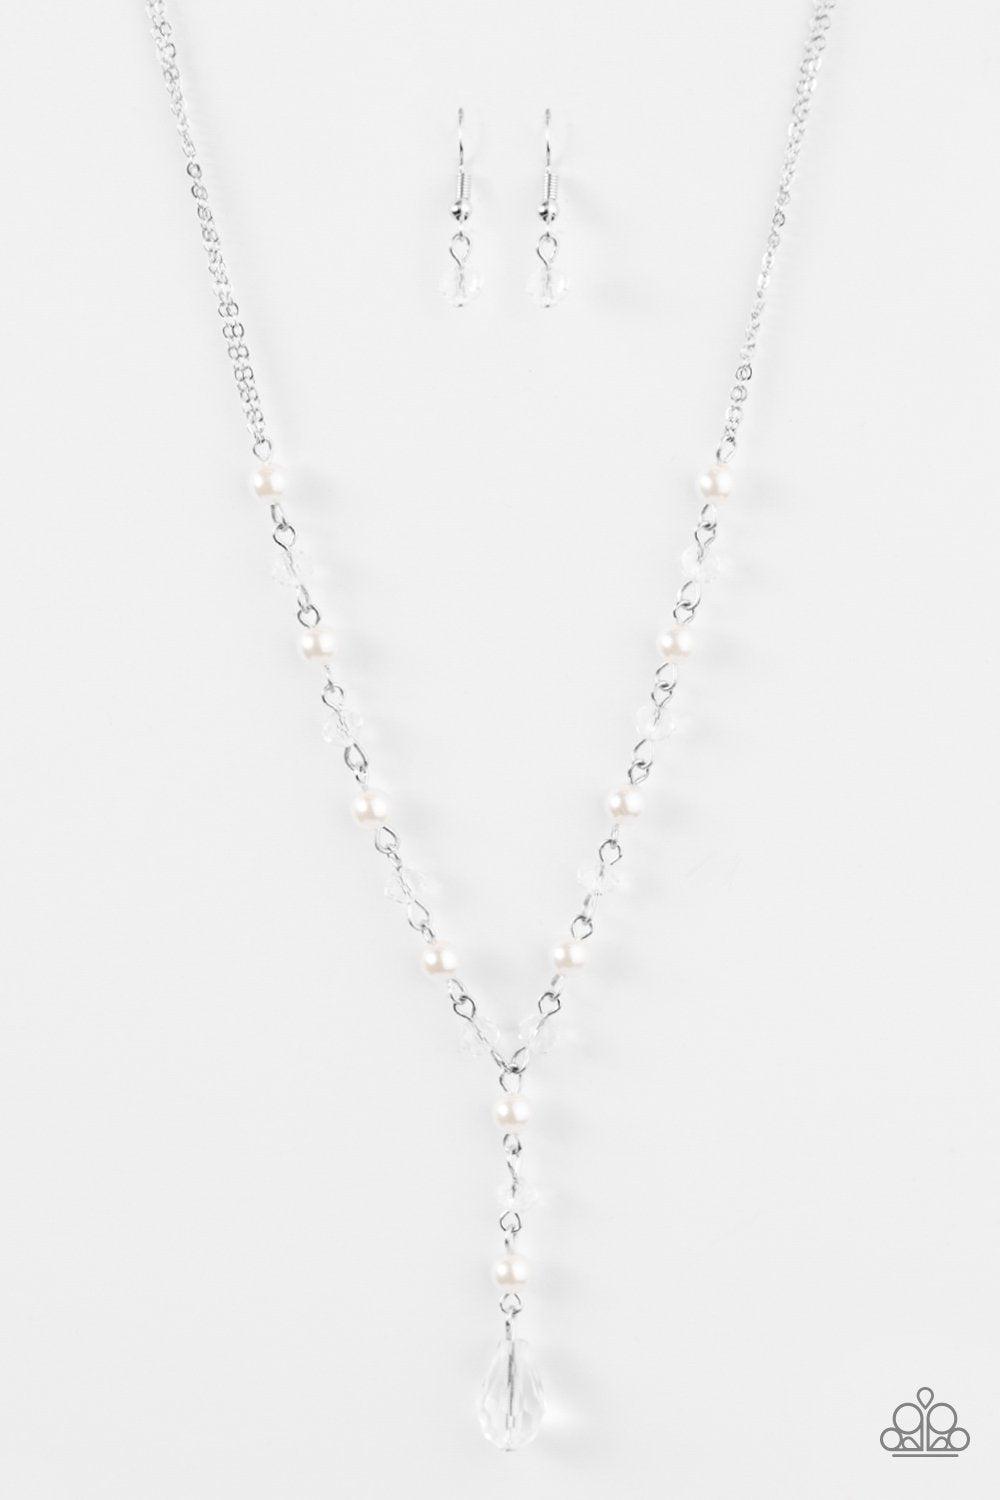 Diva Deluxe White Pearl Tassel Necklace - Paparazzi Accessories-CarasShop.com - $5 Jewelry by Cara Jewels